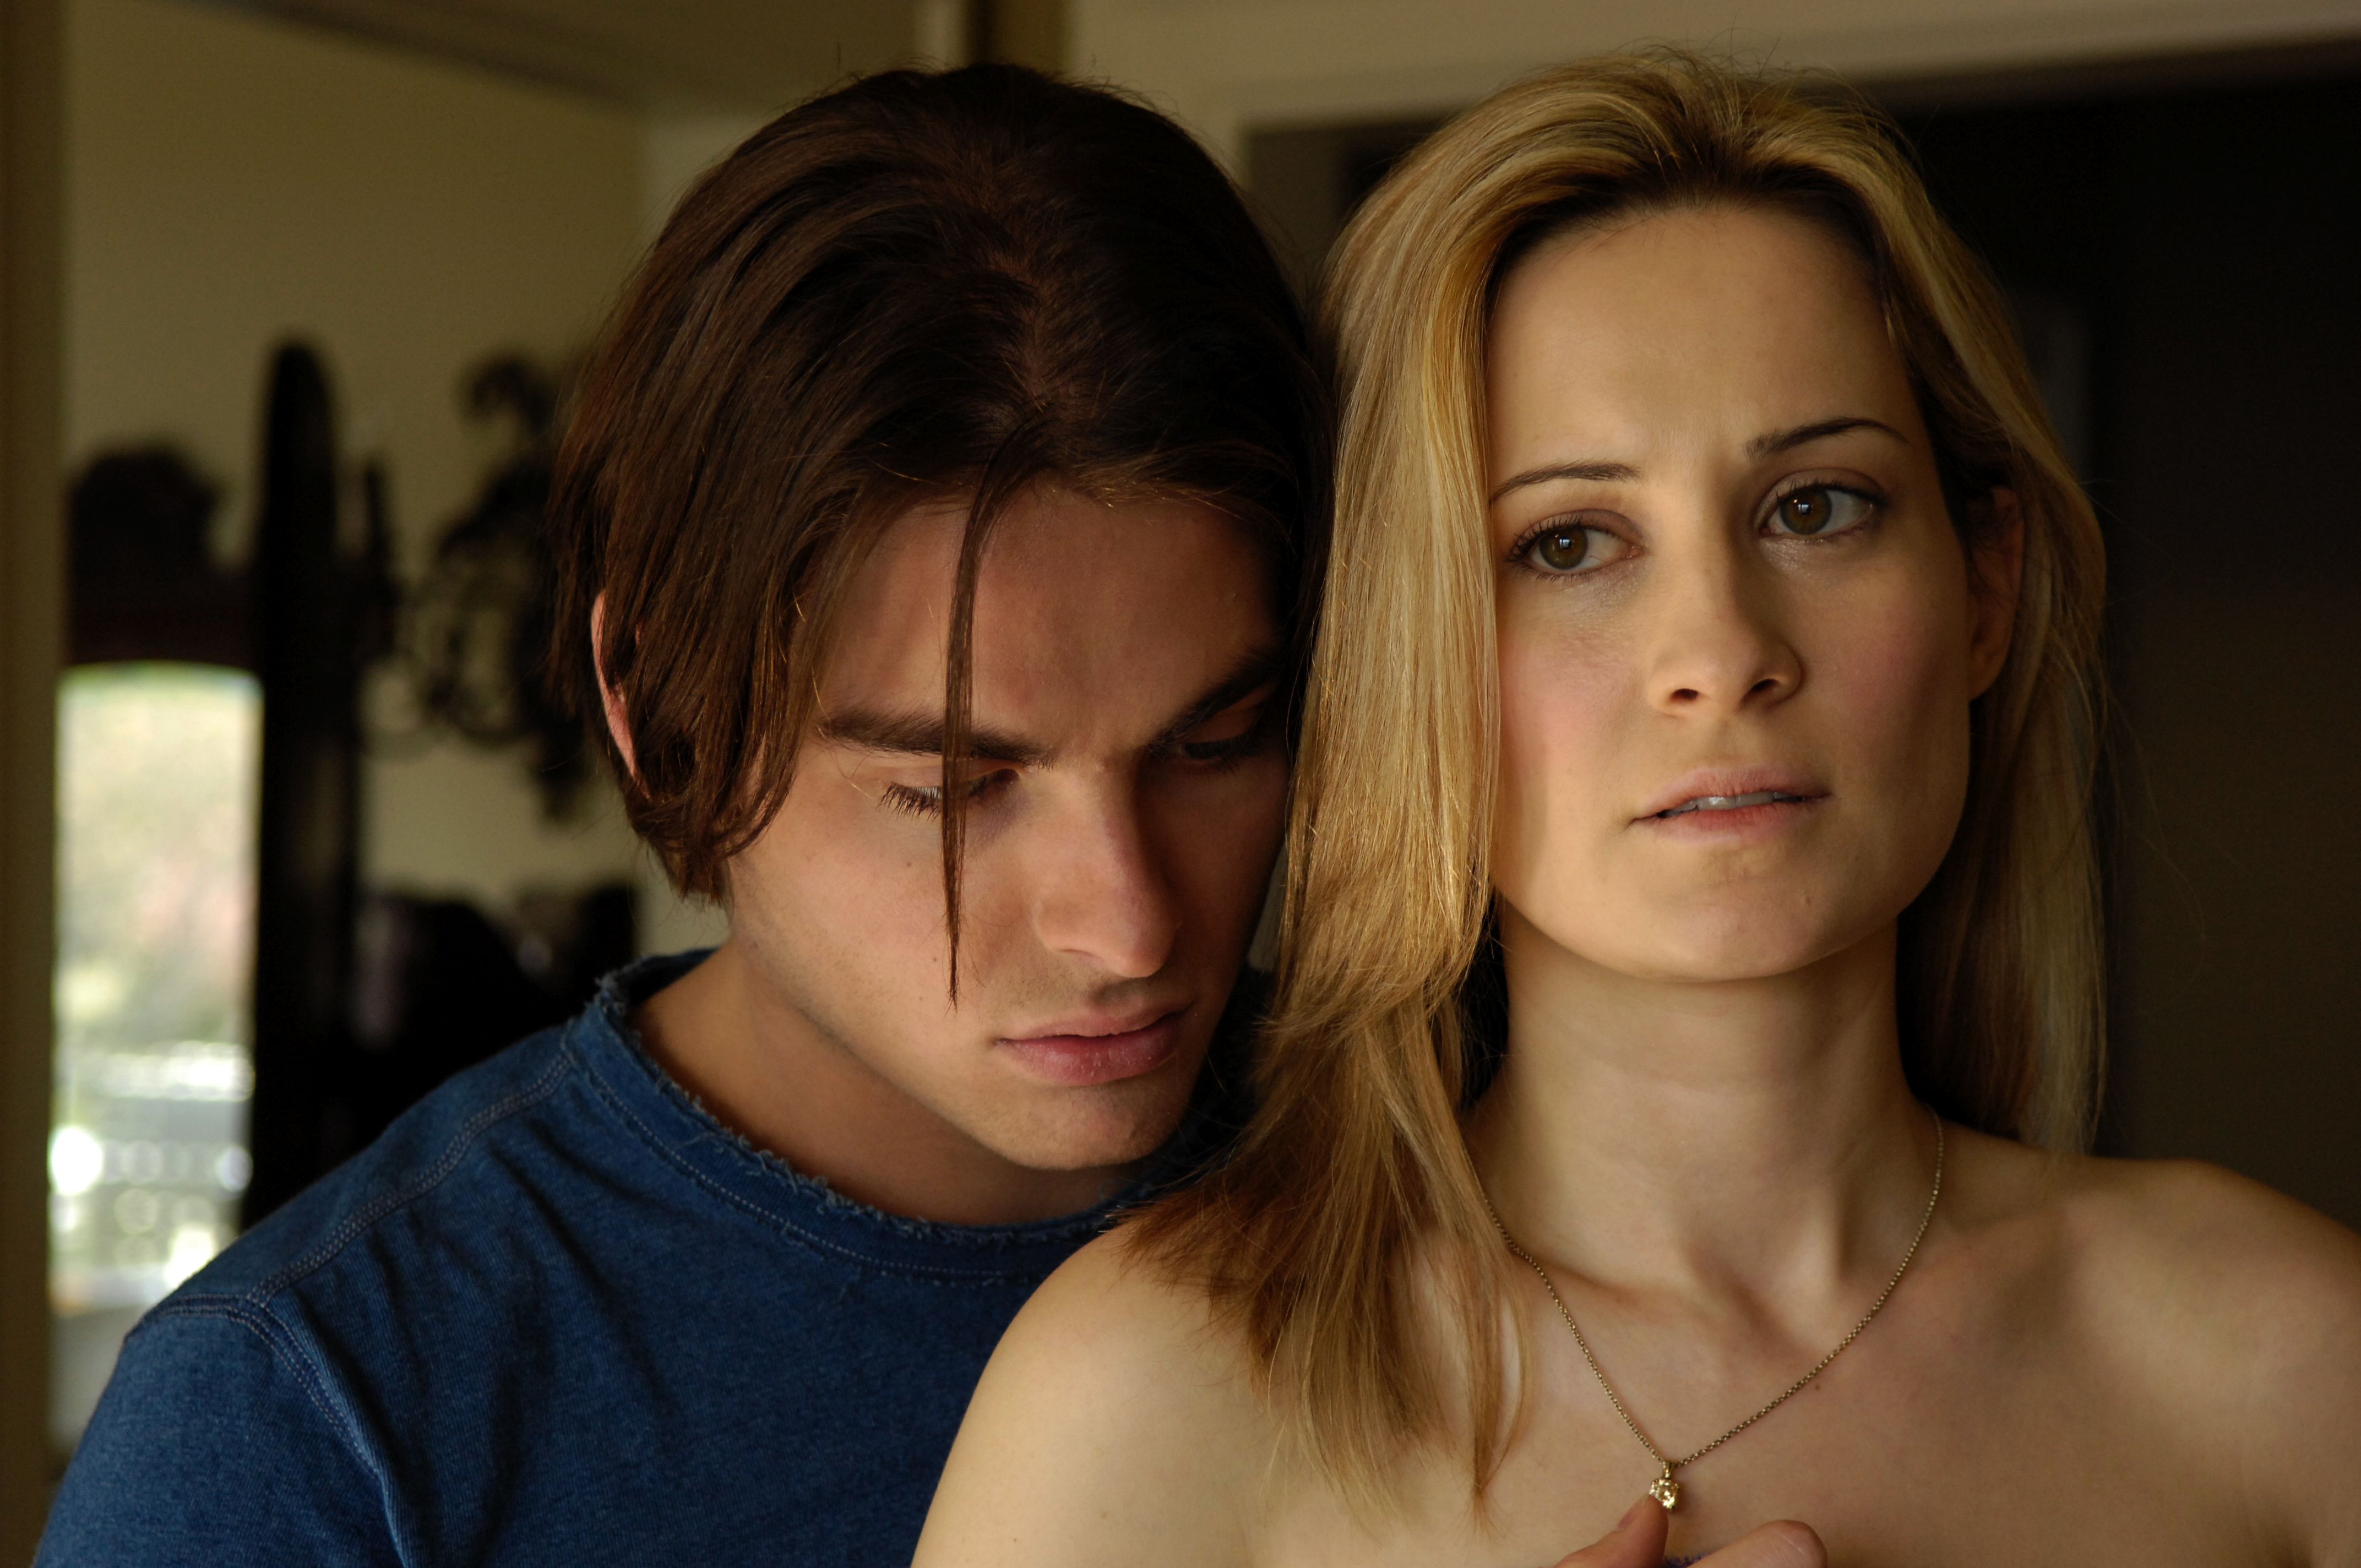 Normal (2007) with Kevin Zegers